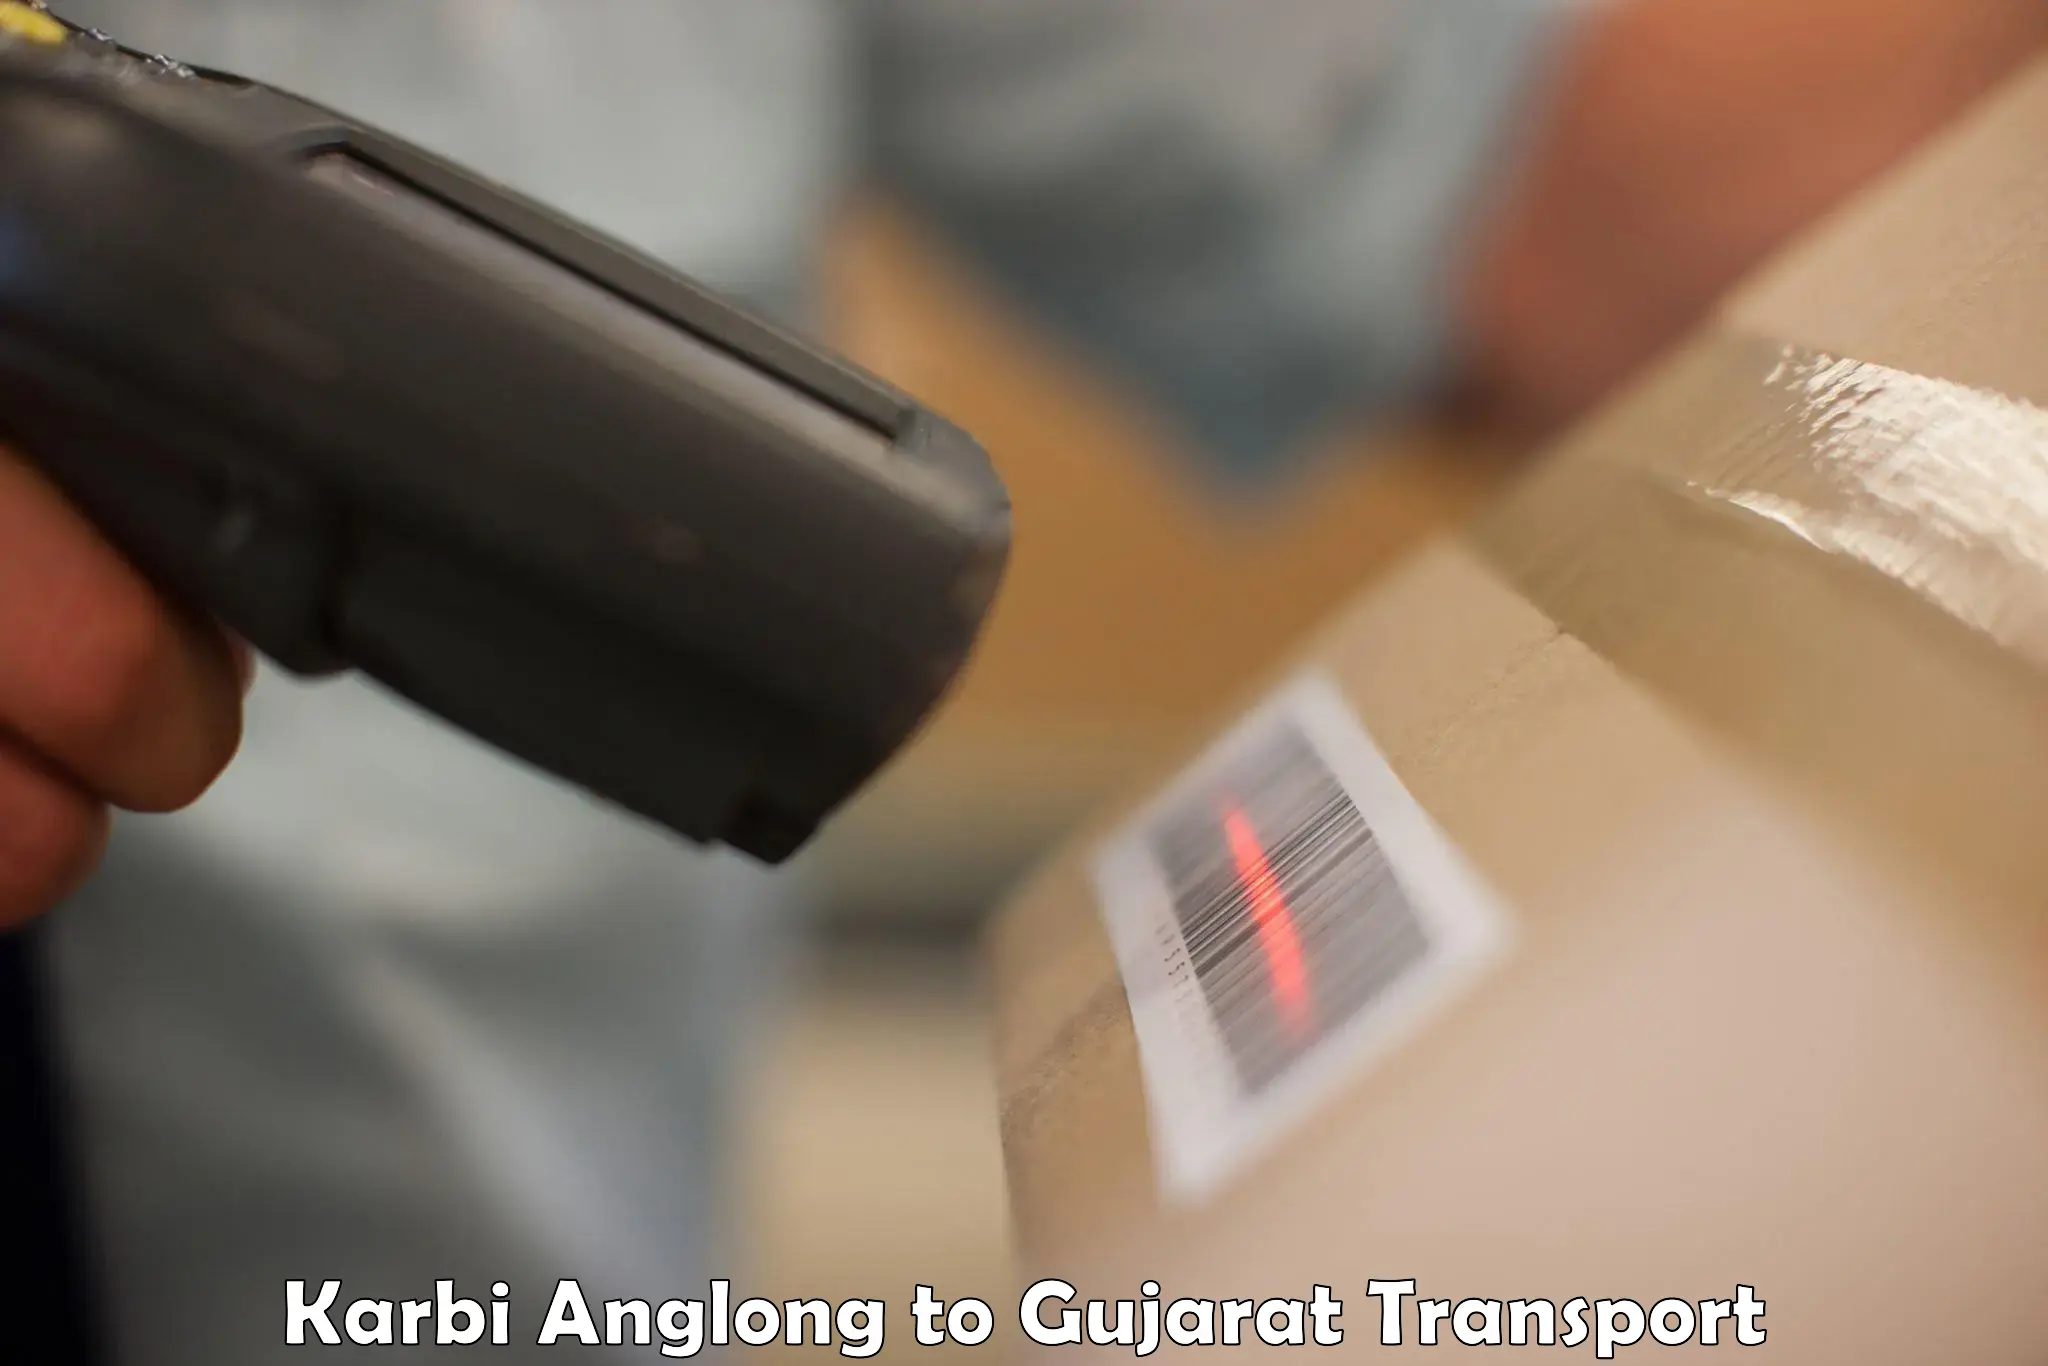 Truck transport companies in India Karbi Anglong to Gujarat